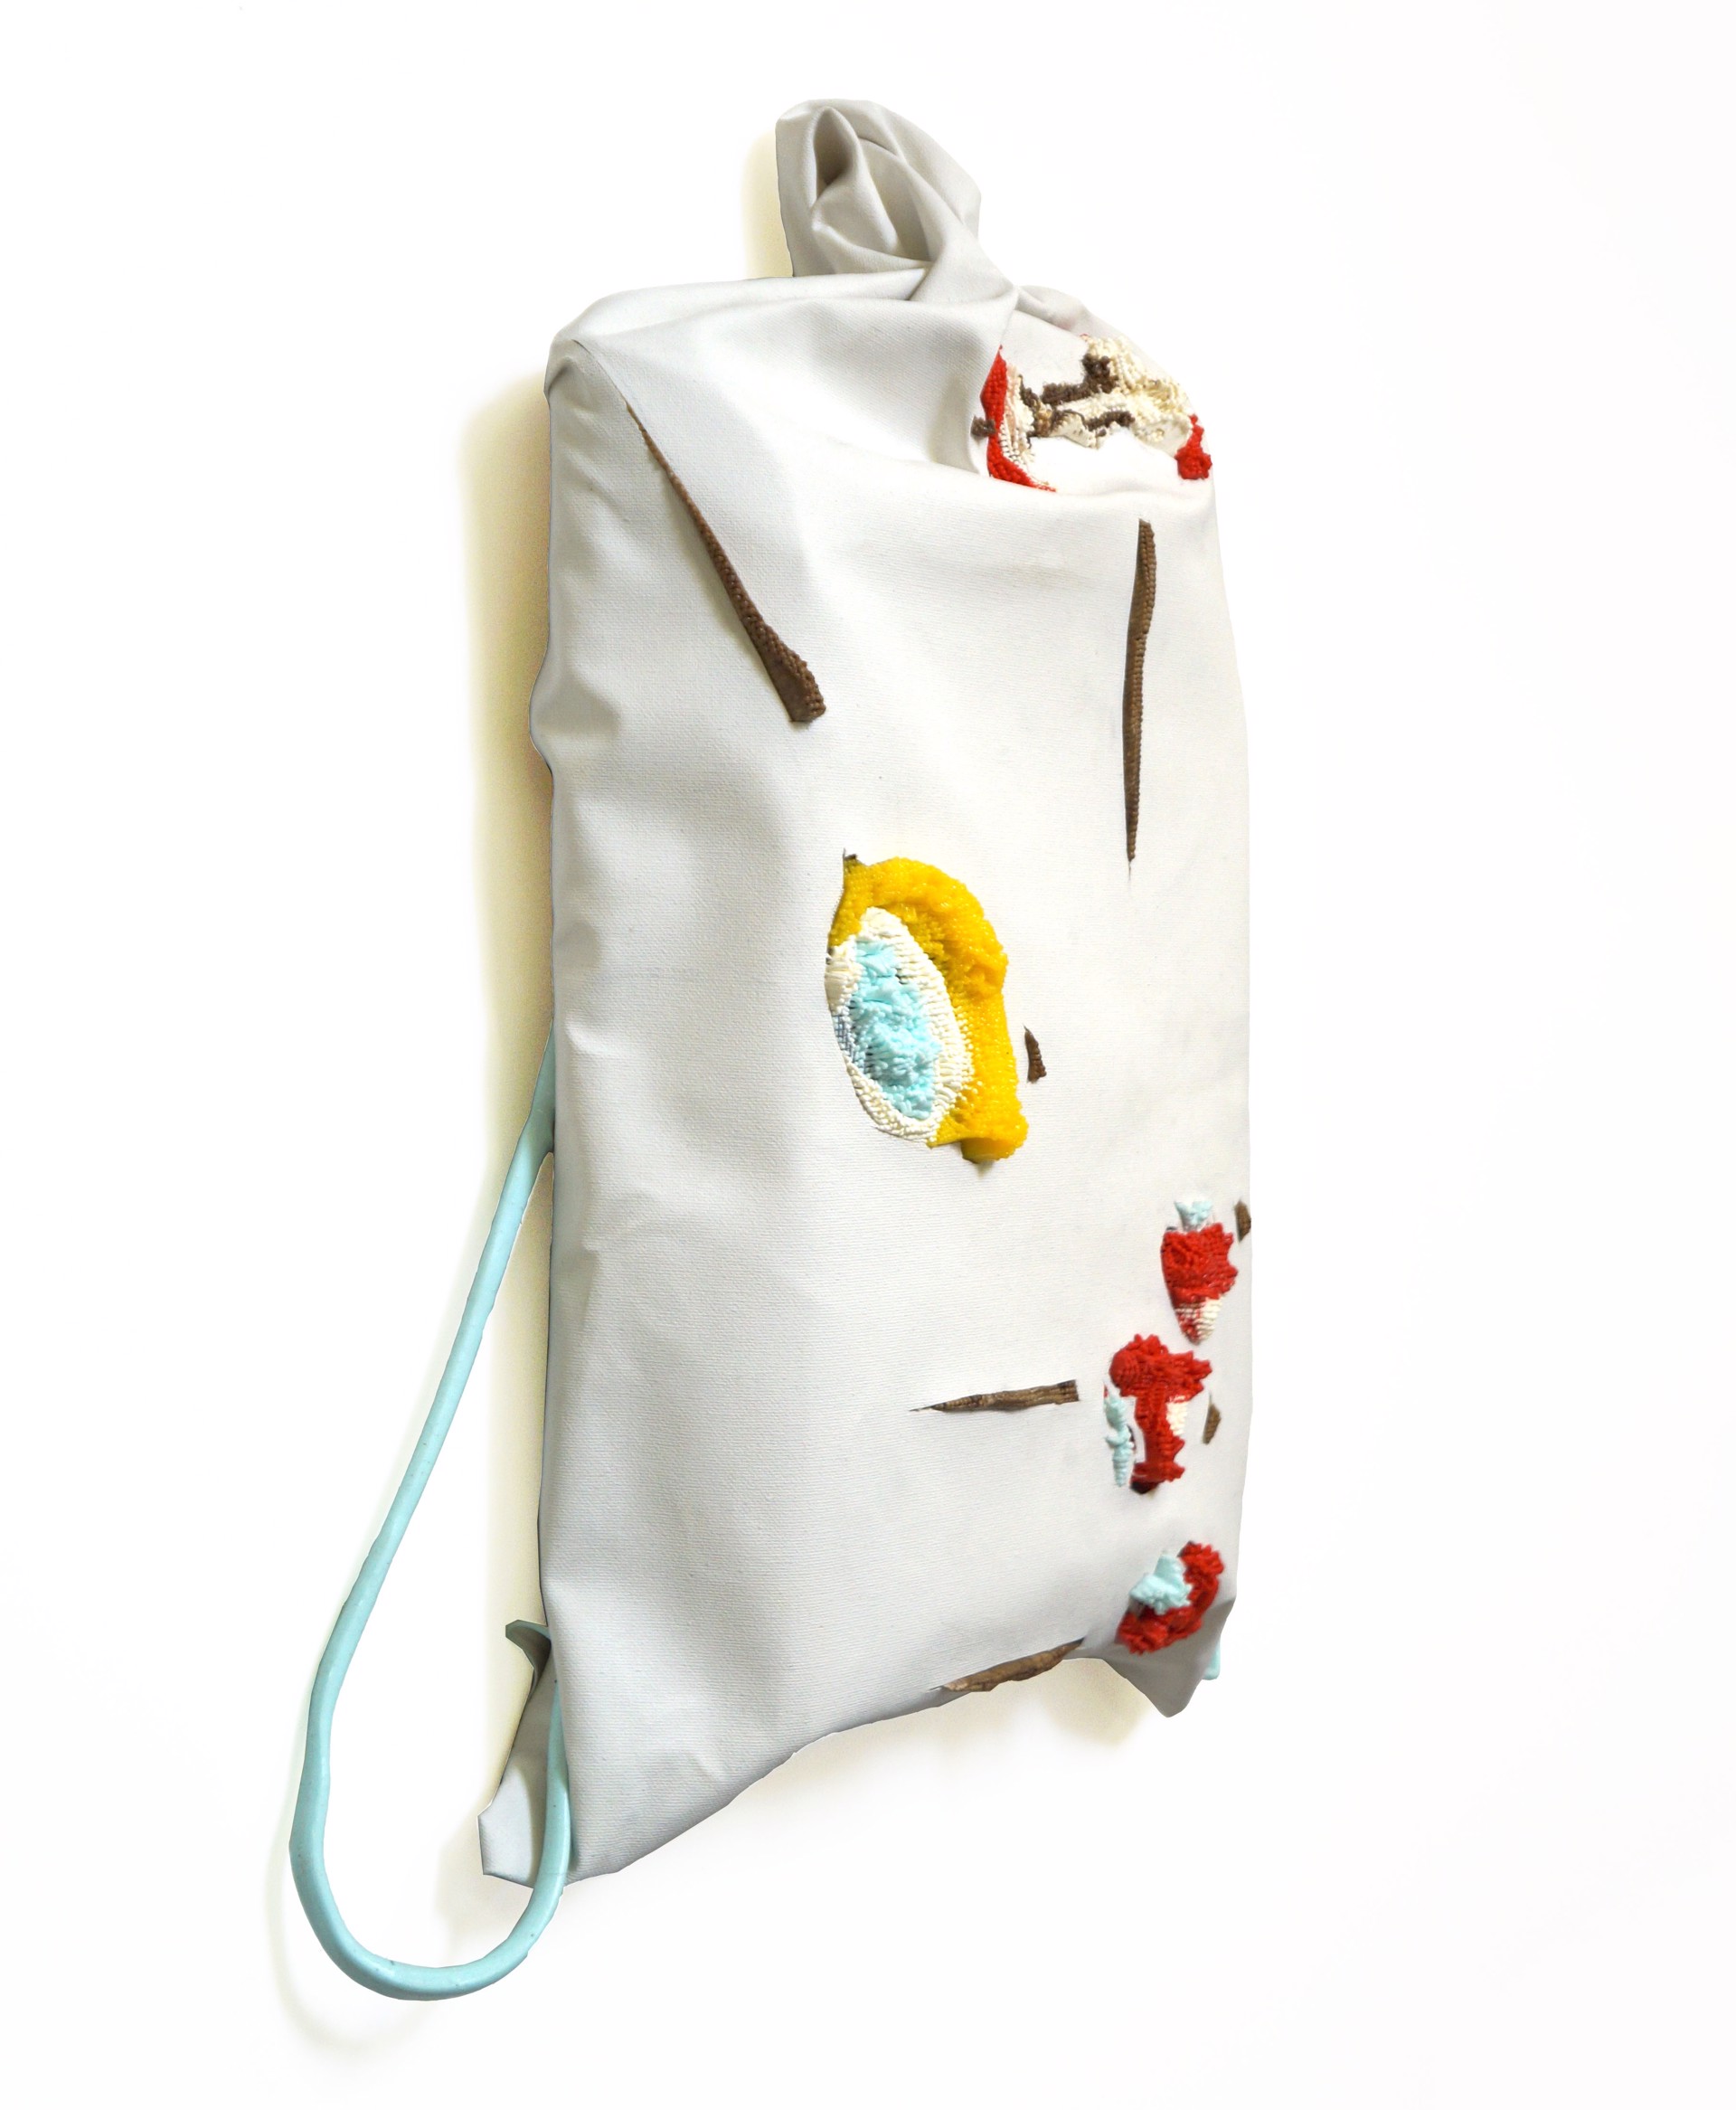 String Backpack with Rotting Strawberries by Eleanor Aldrich